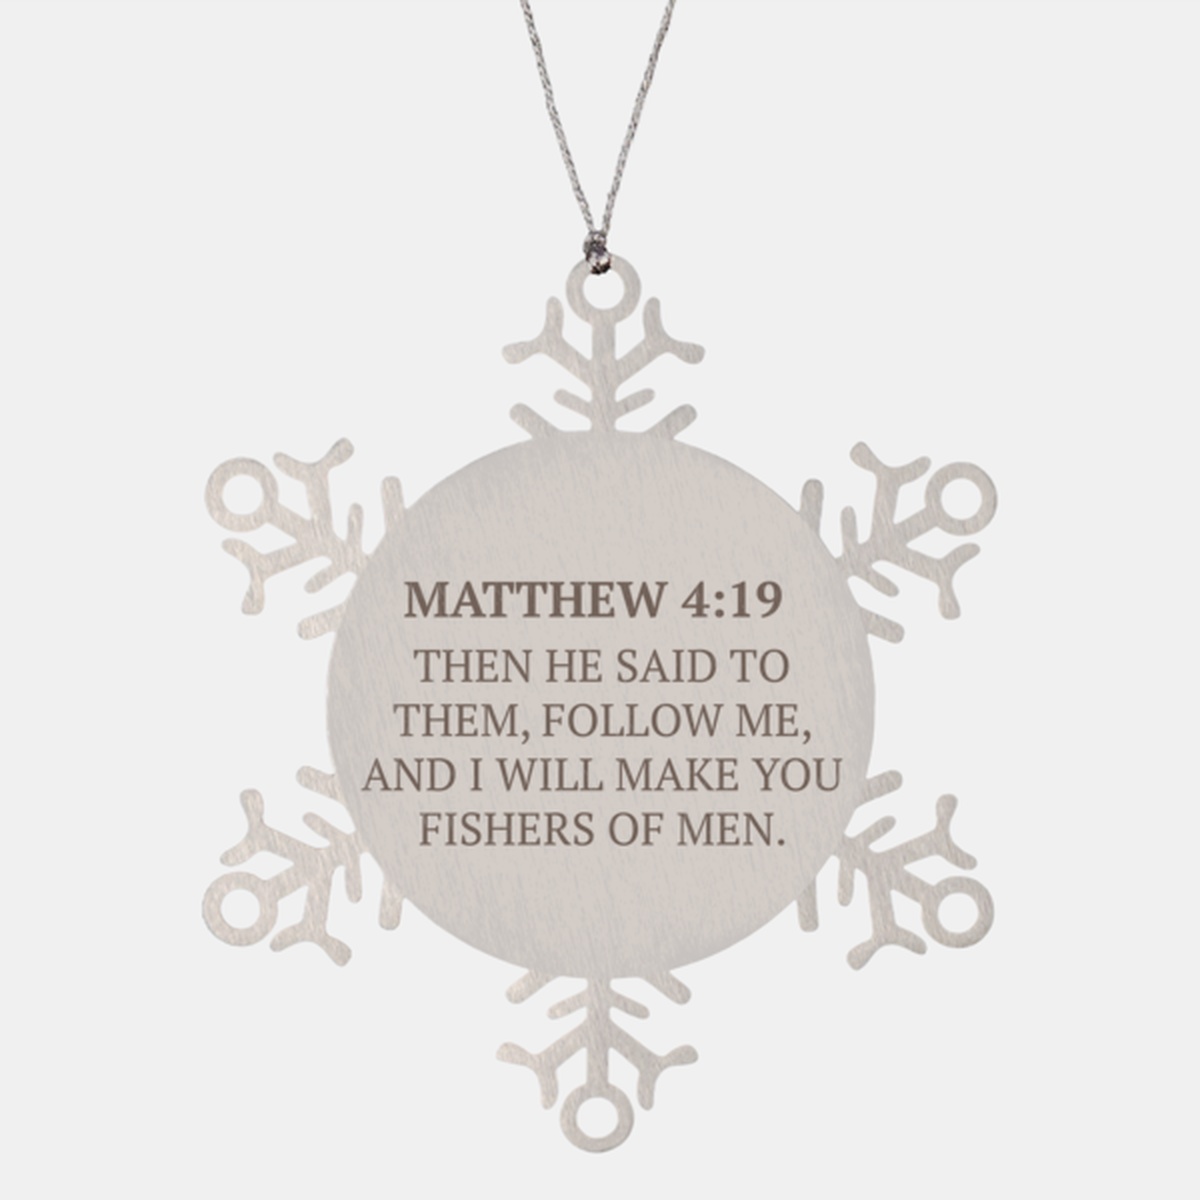 Christian Ornaments For Christmas Tree, Then He Said To Them, Follow Me, Religious Christmas Decorations, Scripture Ornaments Gifts, Bible Verse Ornament